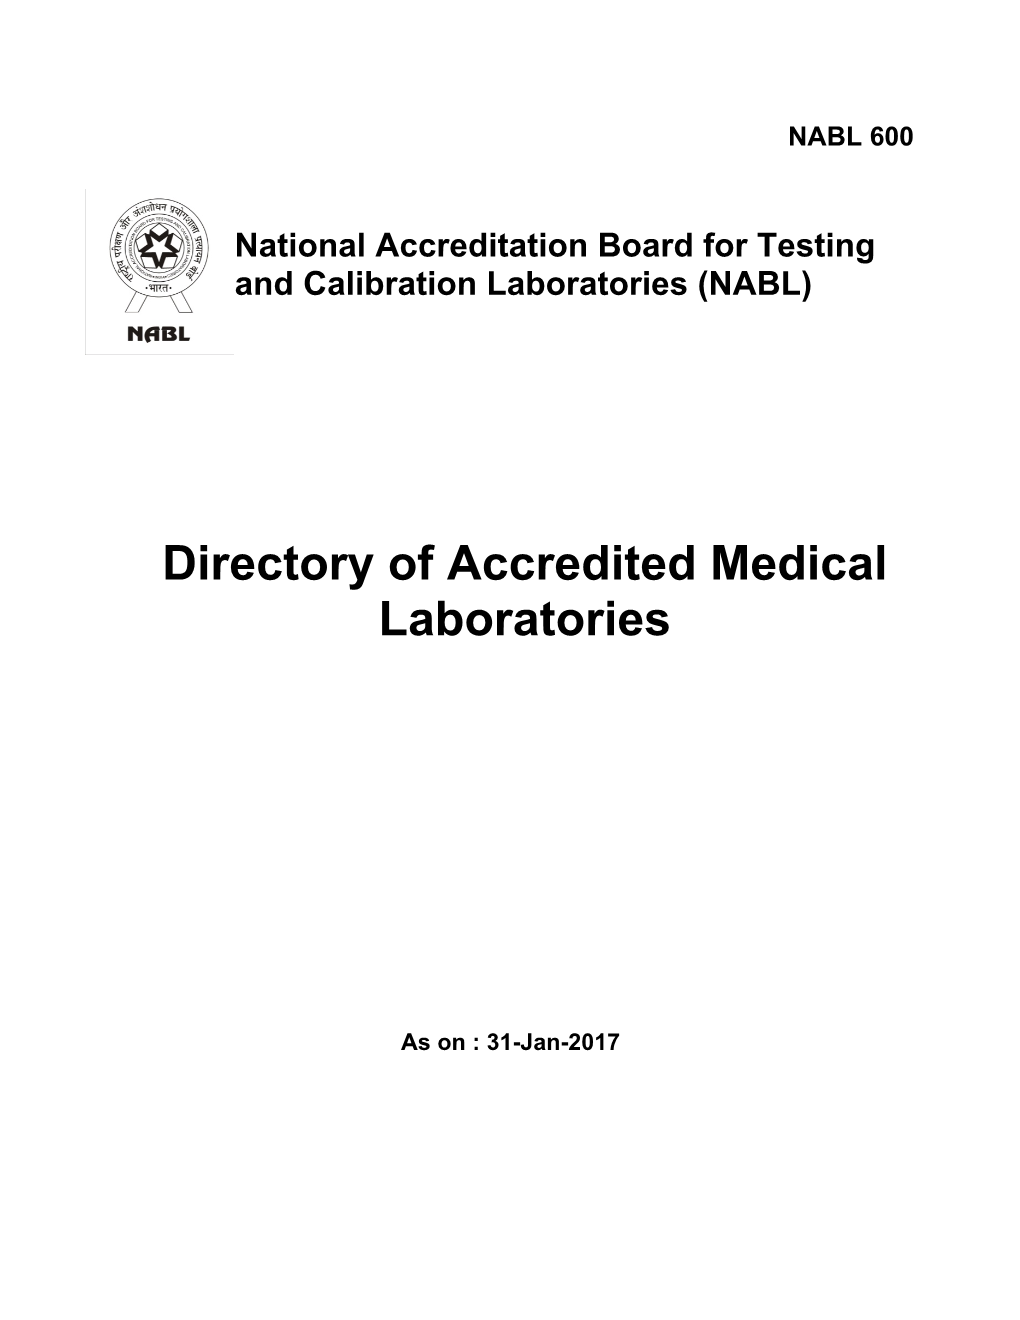 (NABL) Directory of Accredited Medical Laboratories